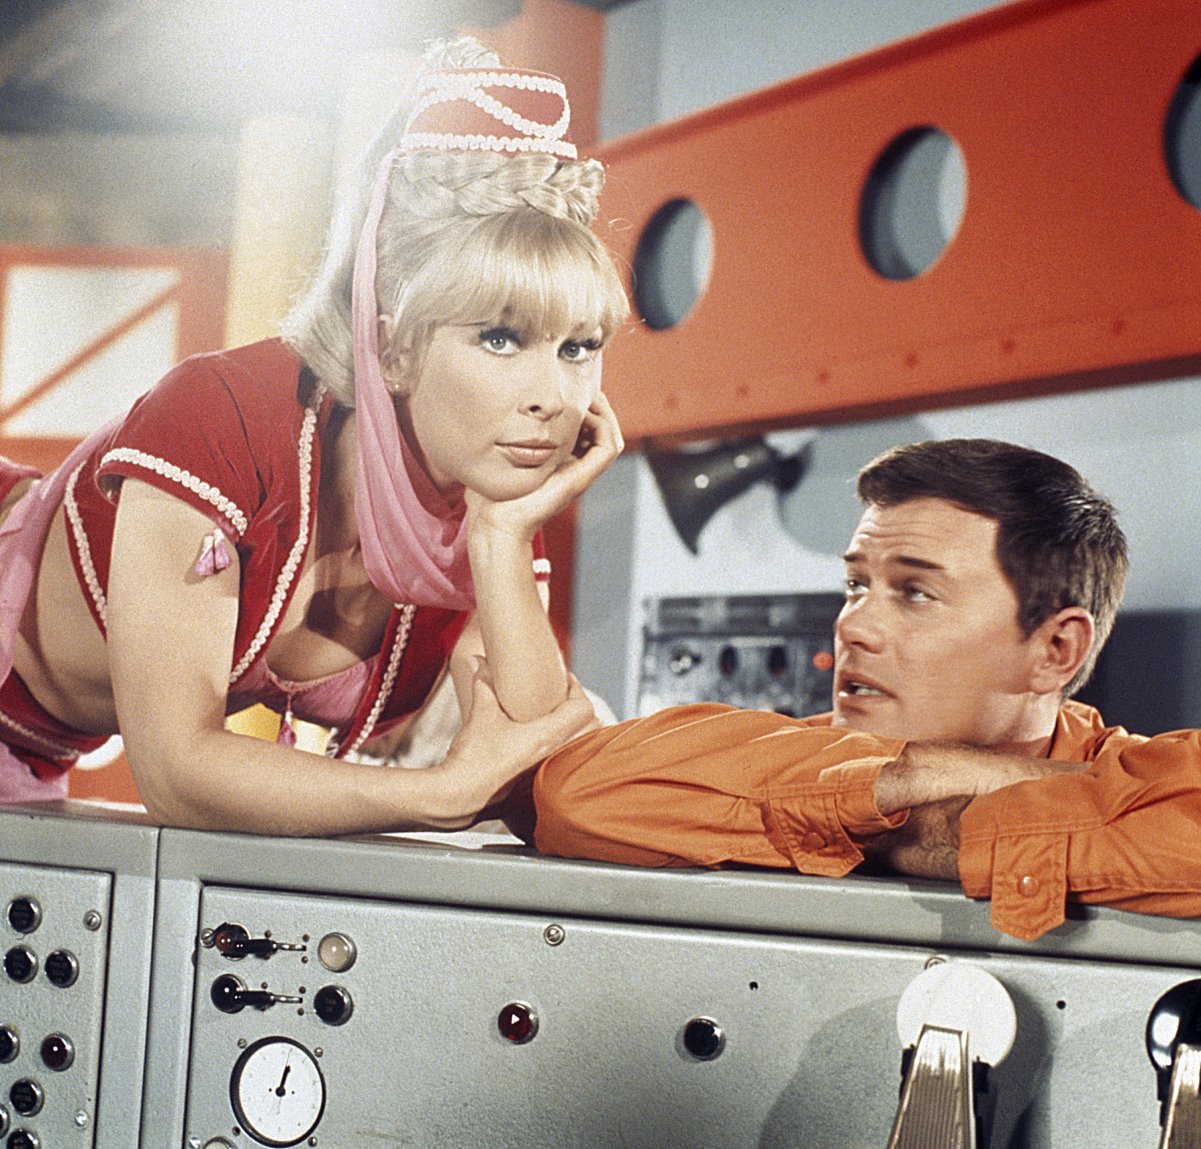 ‘I Dream of Jeannie’: Why Barbara Eden Said Larry Hagman Was Like ‘A Very Talented, Troubled Child’